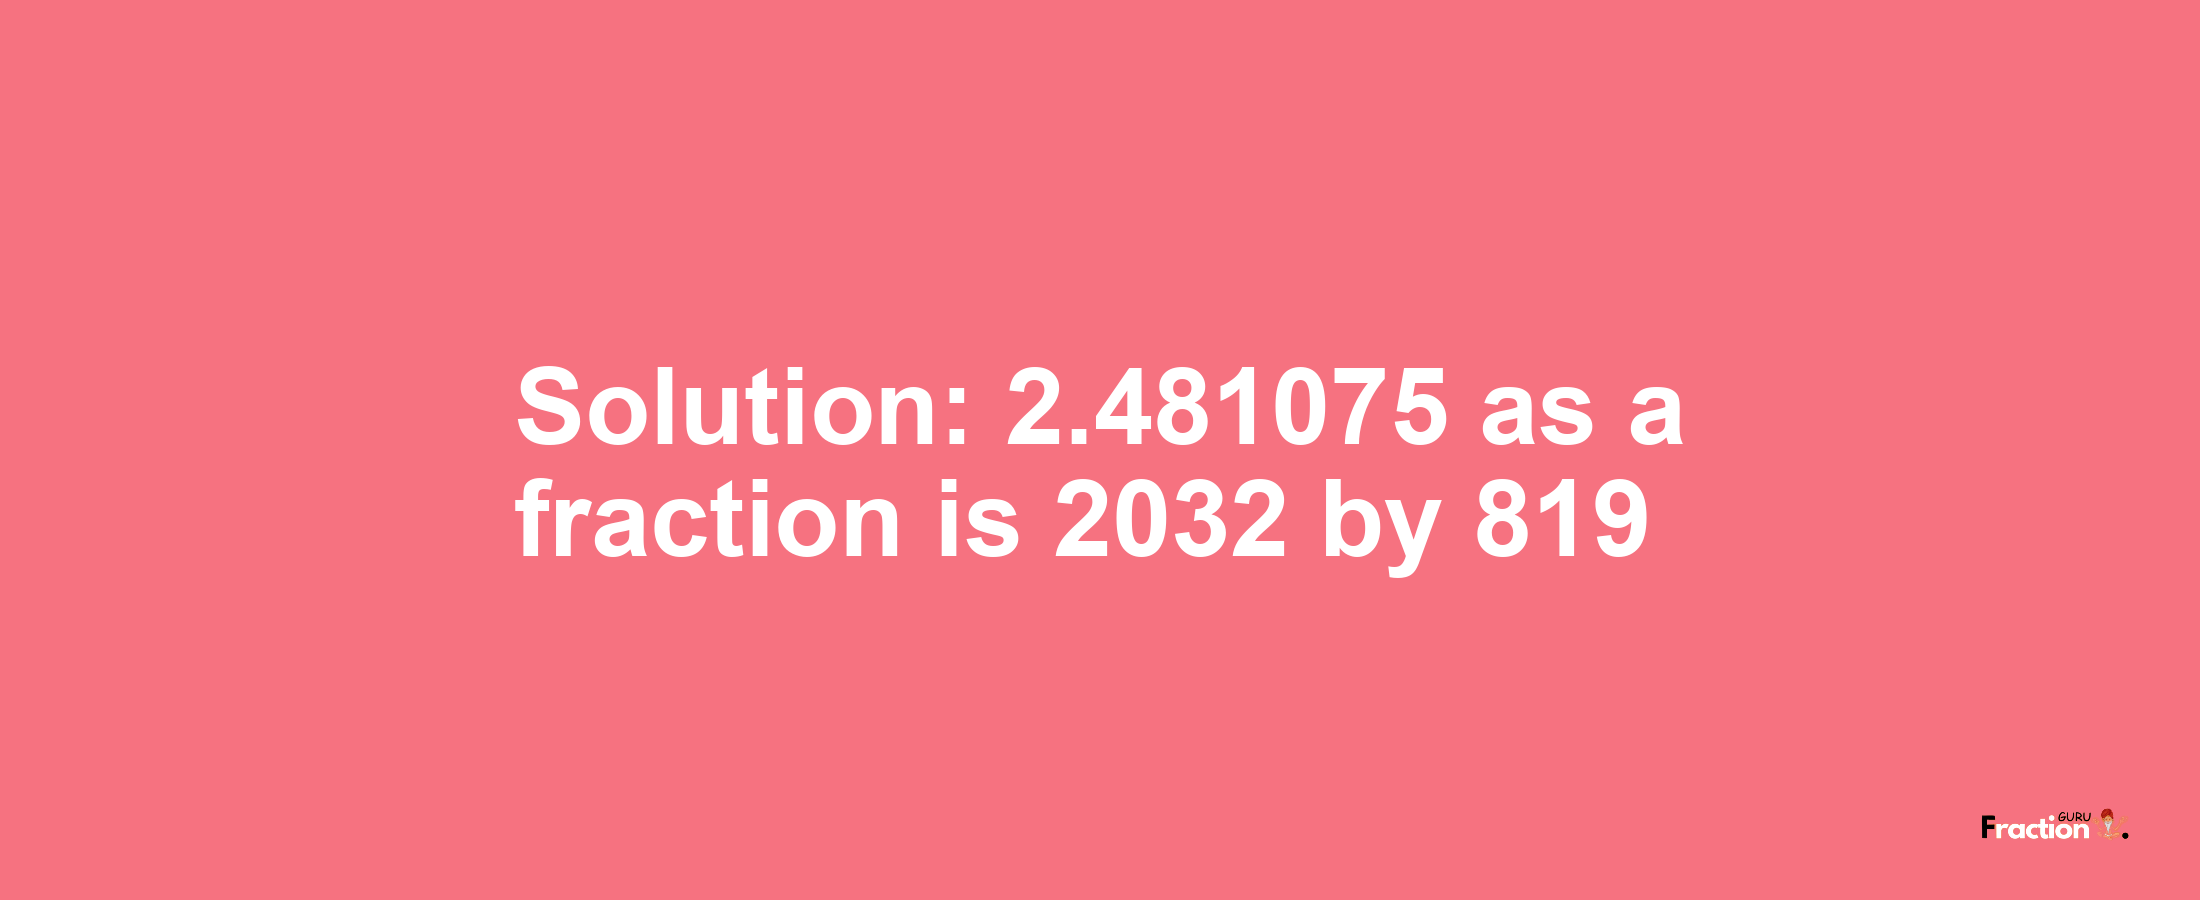 Solution:2.481075 as a fraction is 2032/819